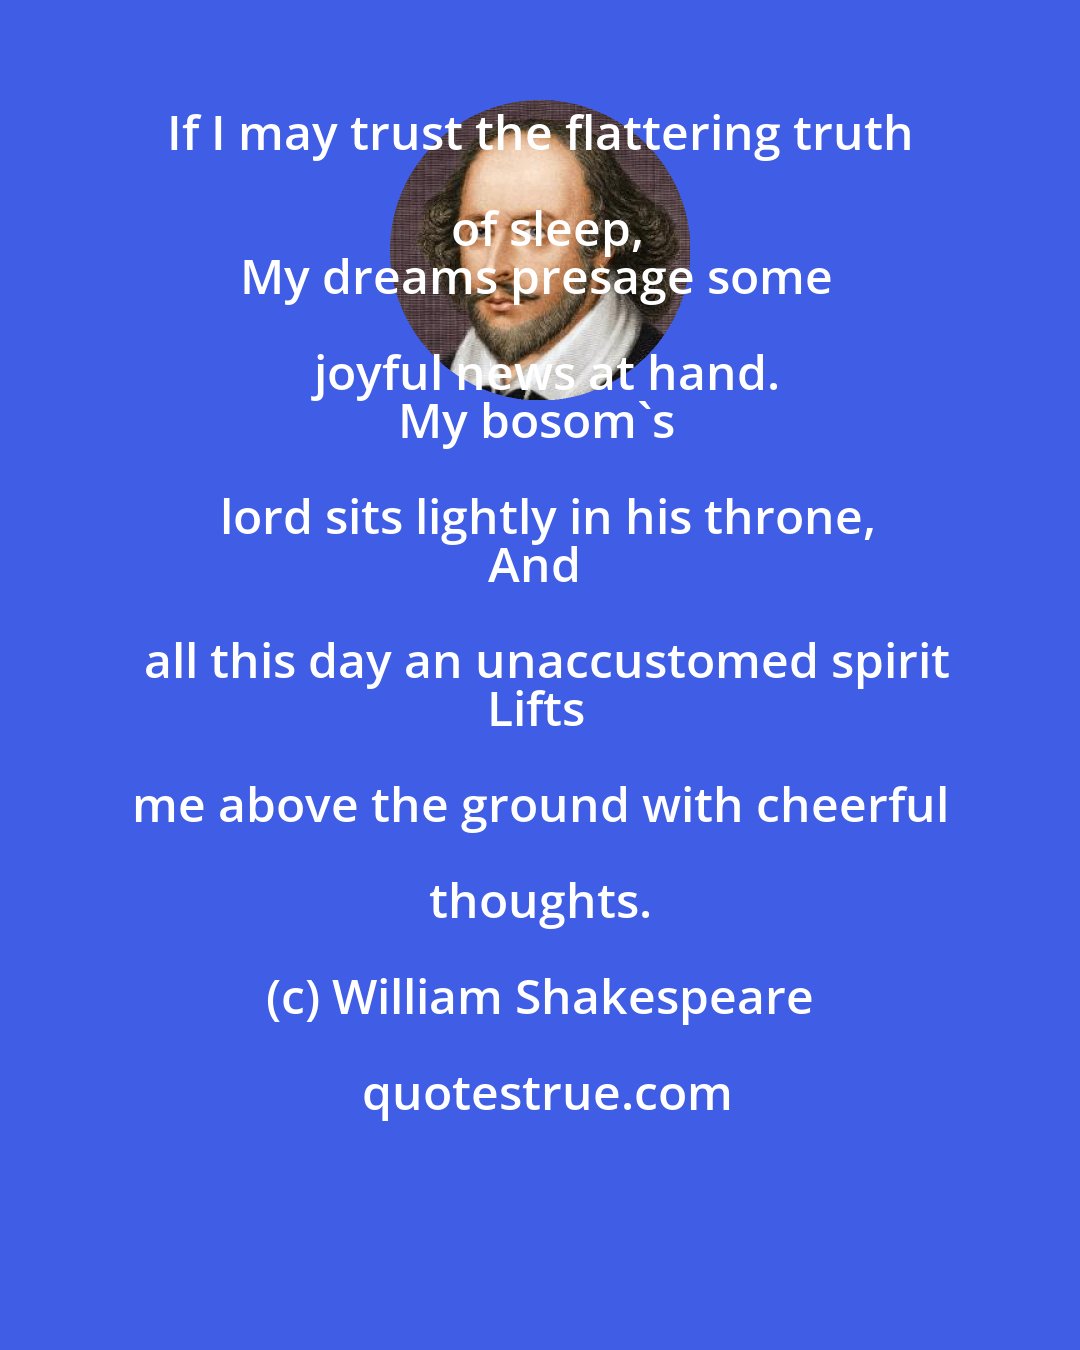 William Shakespeare: If I may trust the flattering truth of sleep,
My dreams presage some joyful news at hand.
My bosom's lord sits lightly in his throne,
And all this day an unaccustomed spirit
Lifts me above the ground with cheerful thoughts.